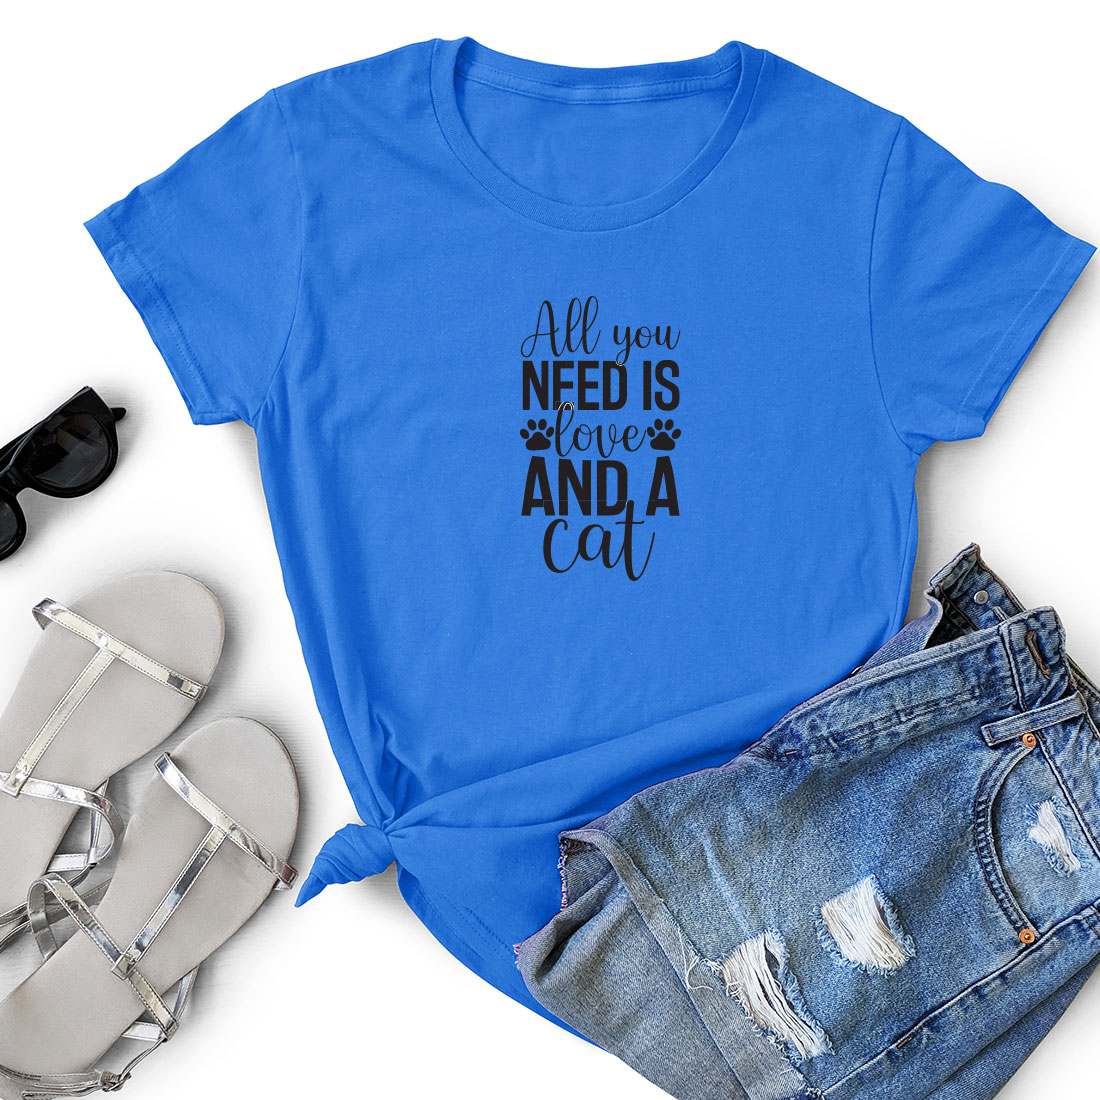 T - shirt that says all you need is love and a cat.